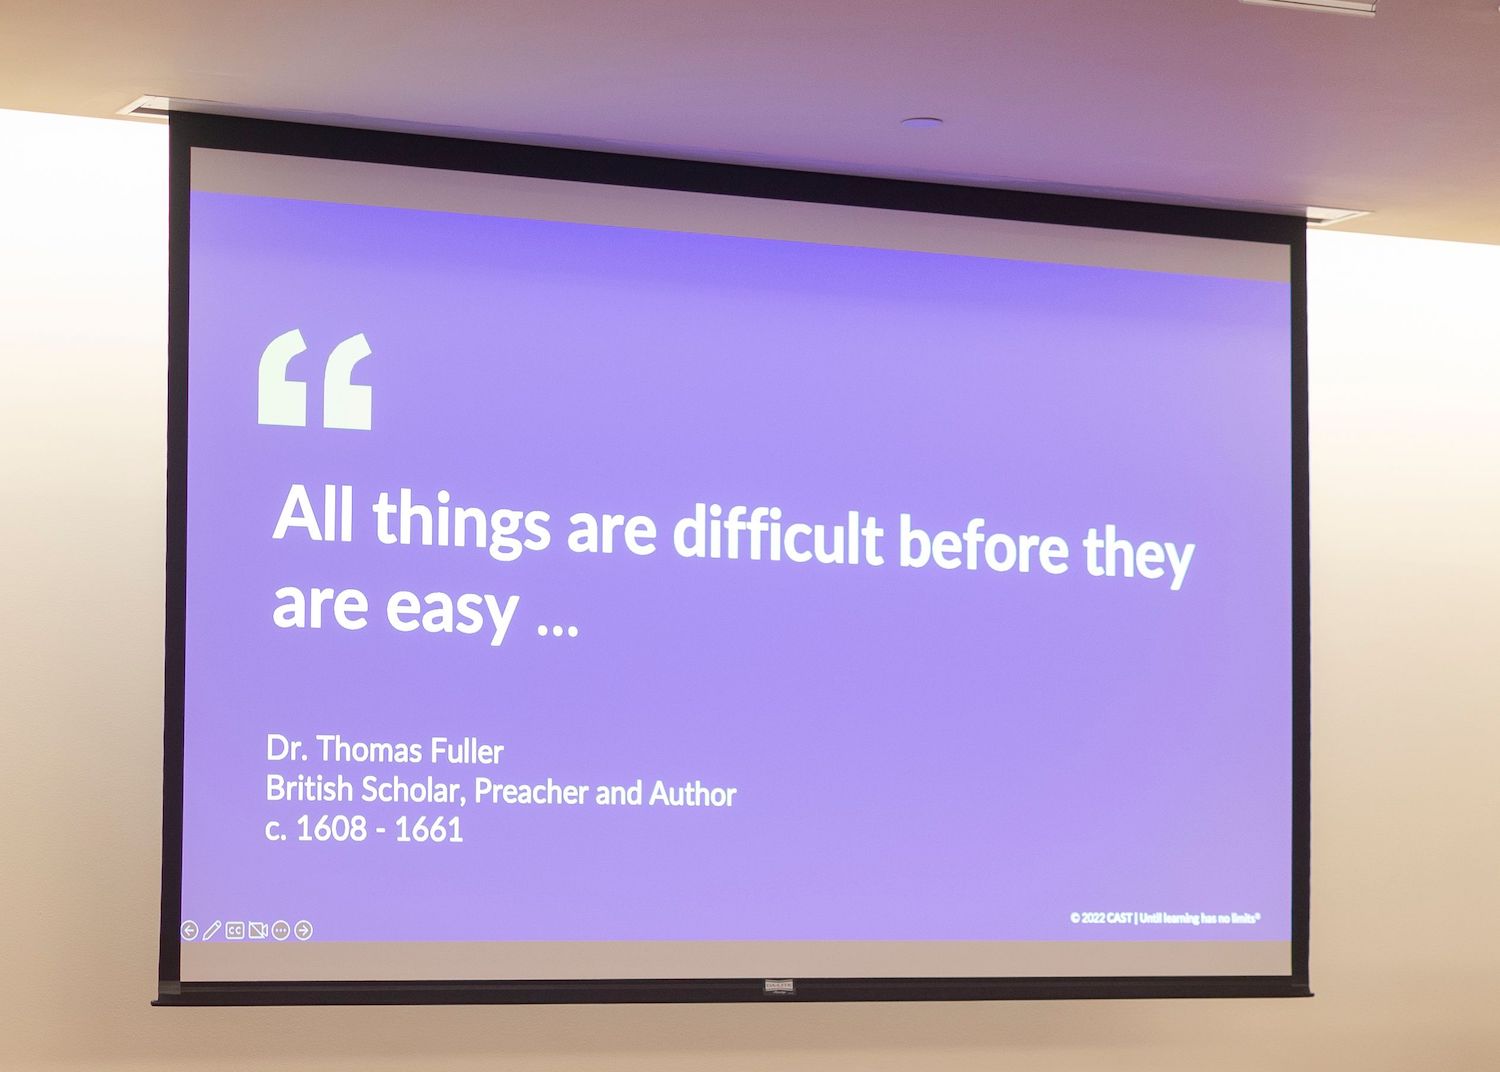 Slide of quote: "All things are difficult before they are easy."